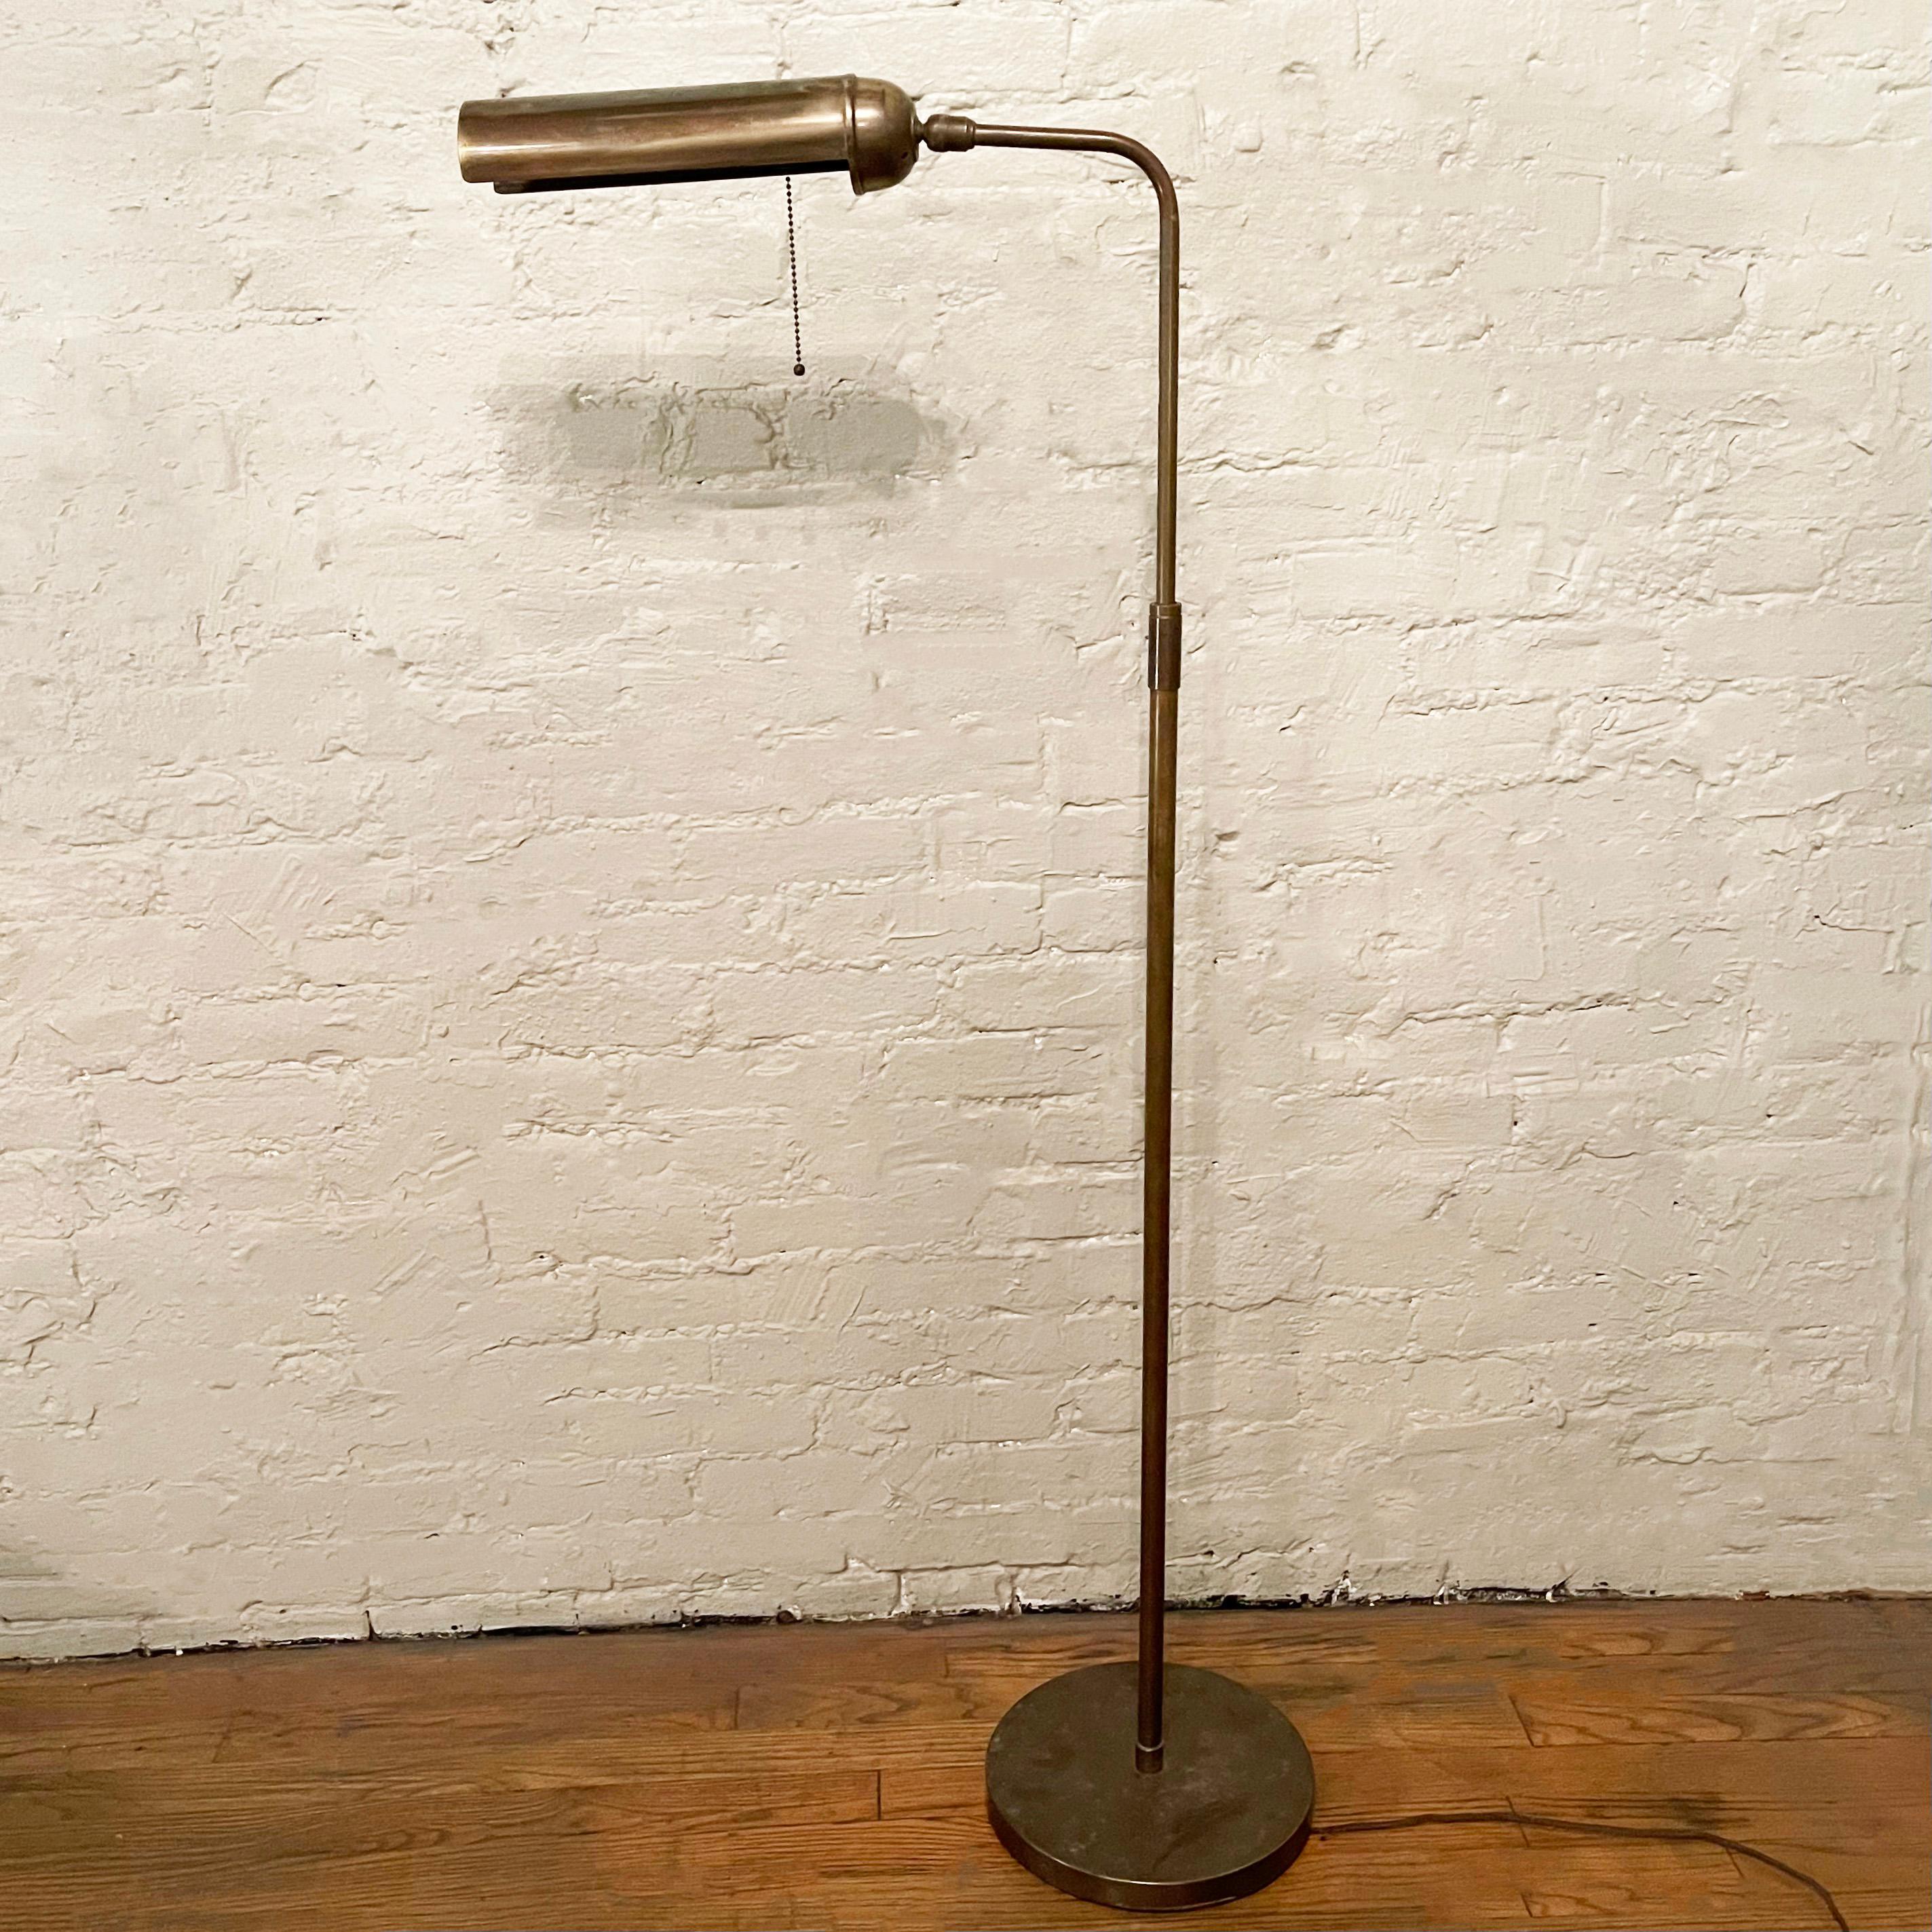 MId-century, patinated brass, library reading floor lamp features an adjustable, linear shade that pivots on a ball to cast light up, down or sideways with original pull chain switch and a telescopic stem to adjust the height from 50 - 56 inches.